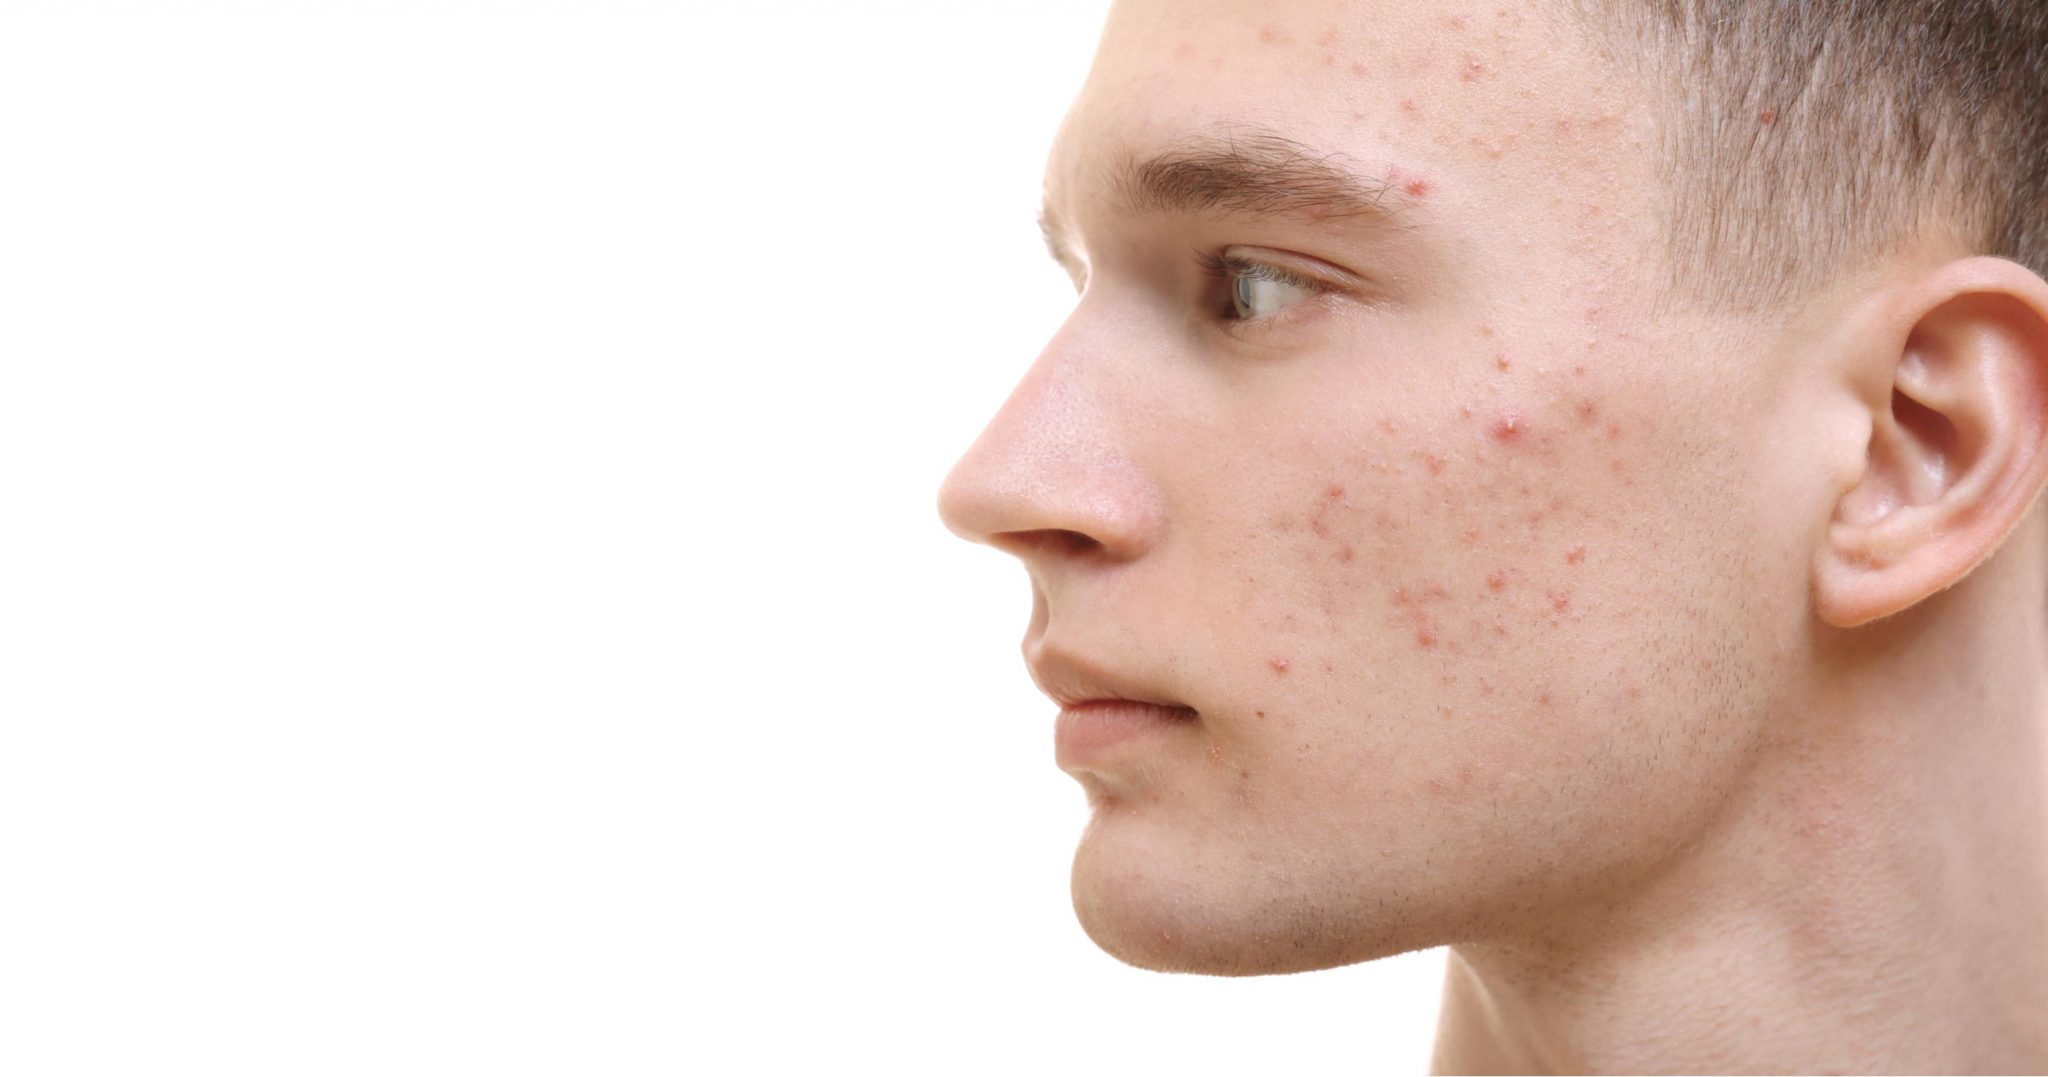 Will Parents Pass Acne Skin to Their Kids?